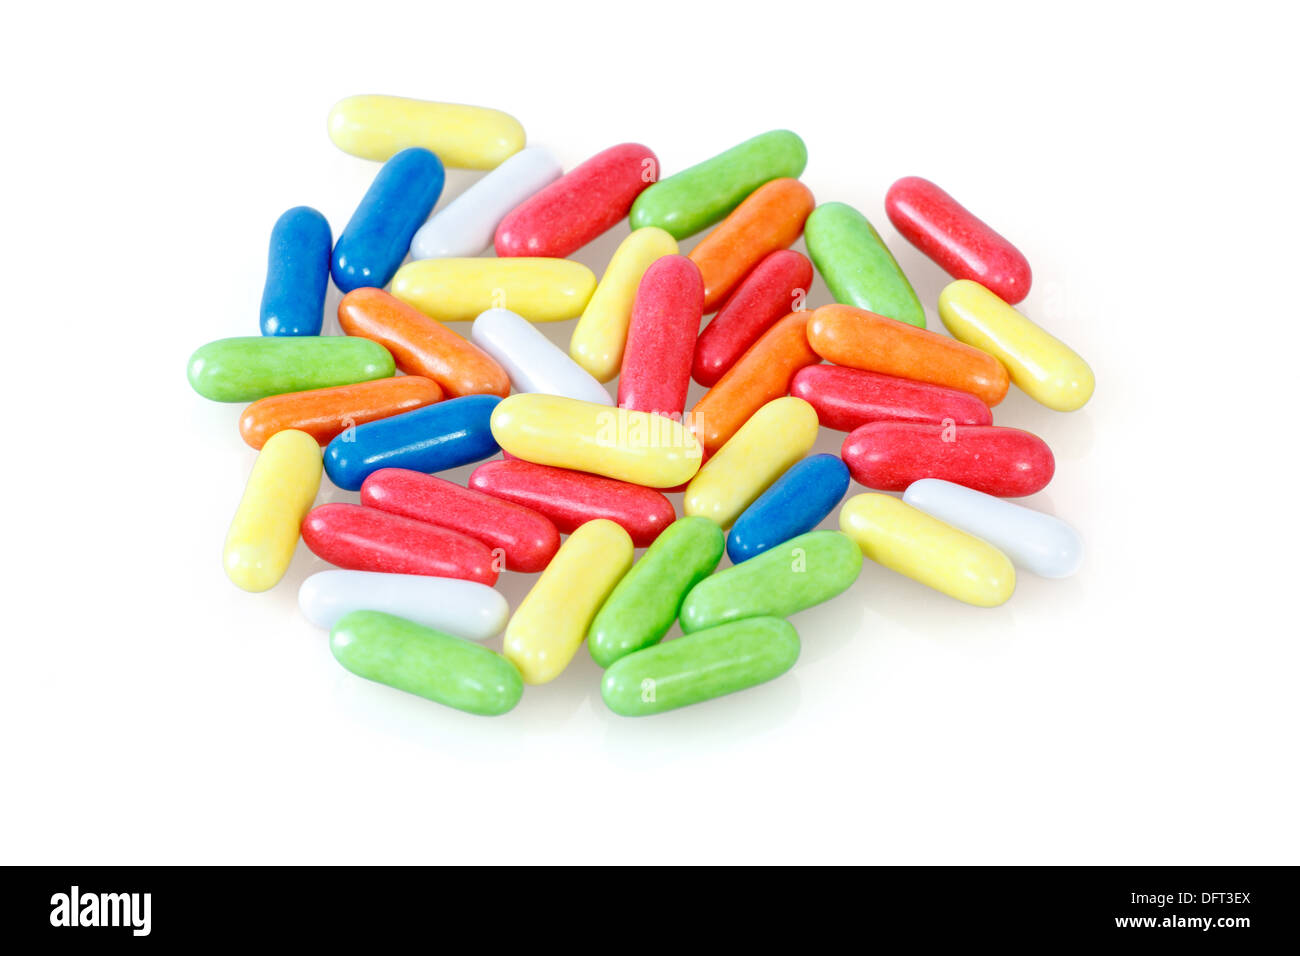 close up of colorful licorice unsorted sweets on white background Stock Photo